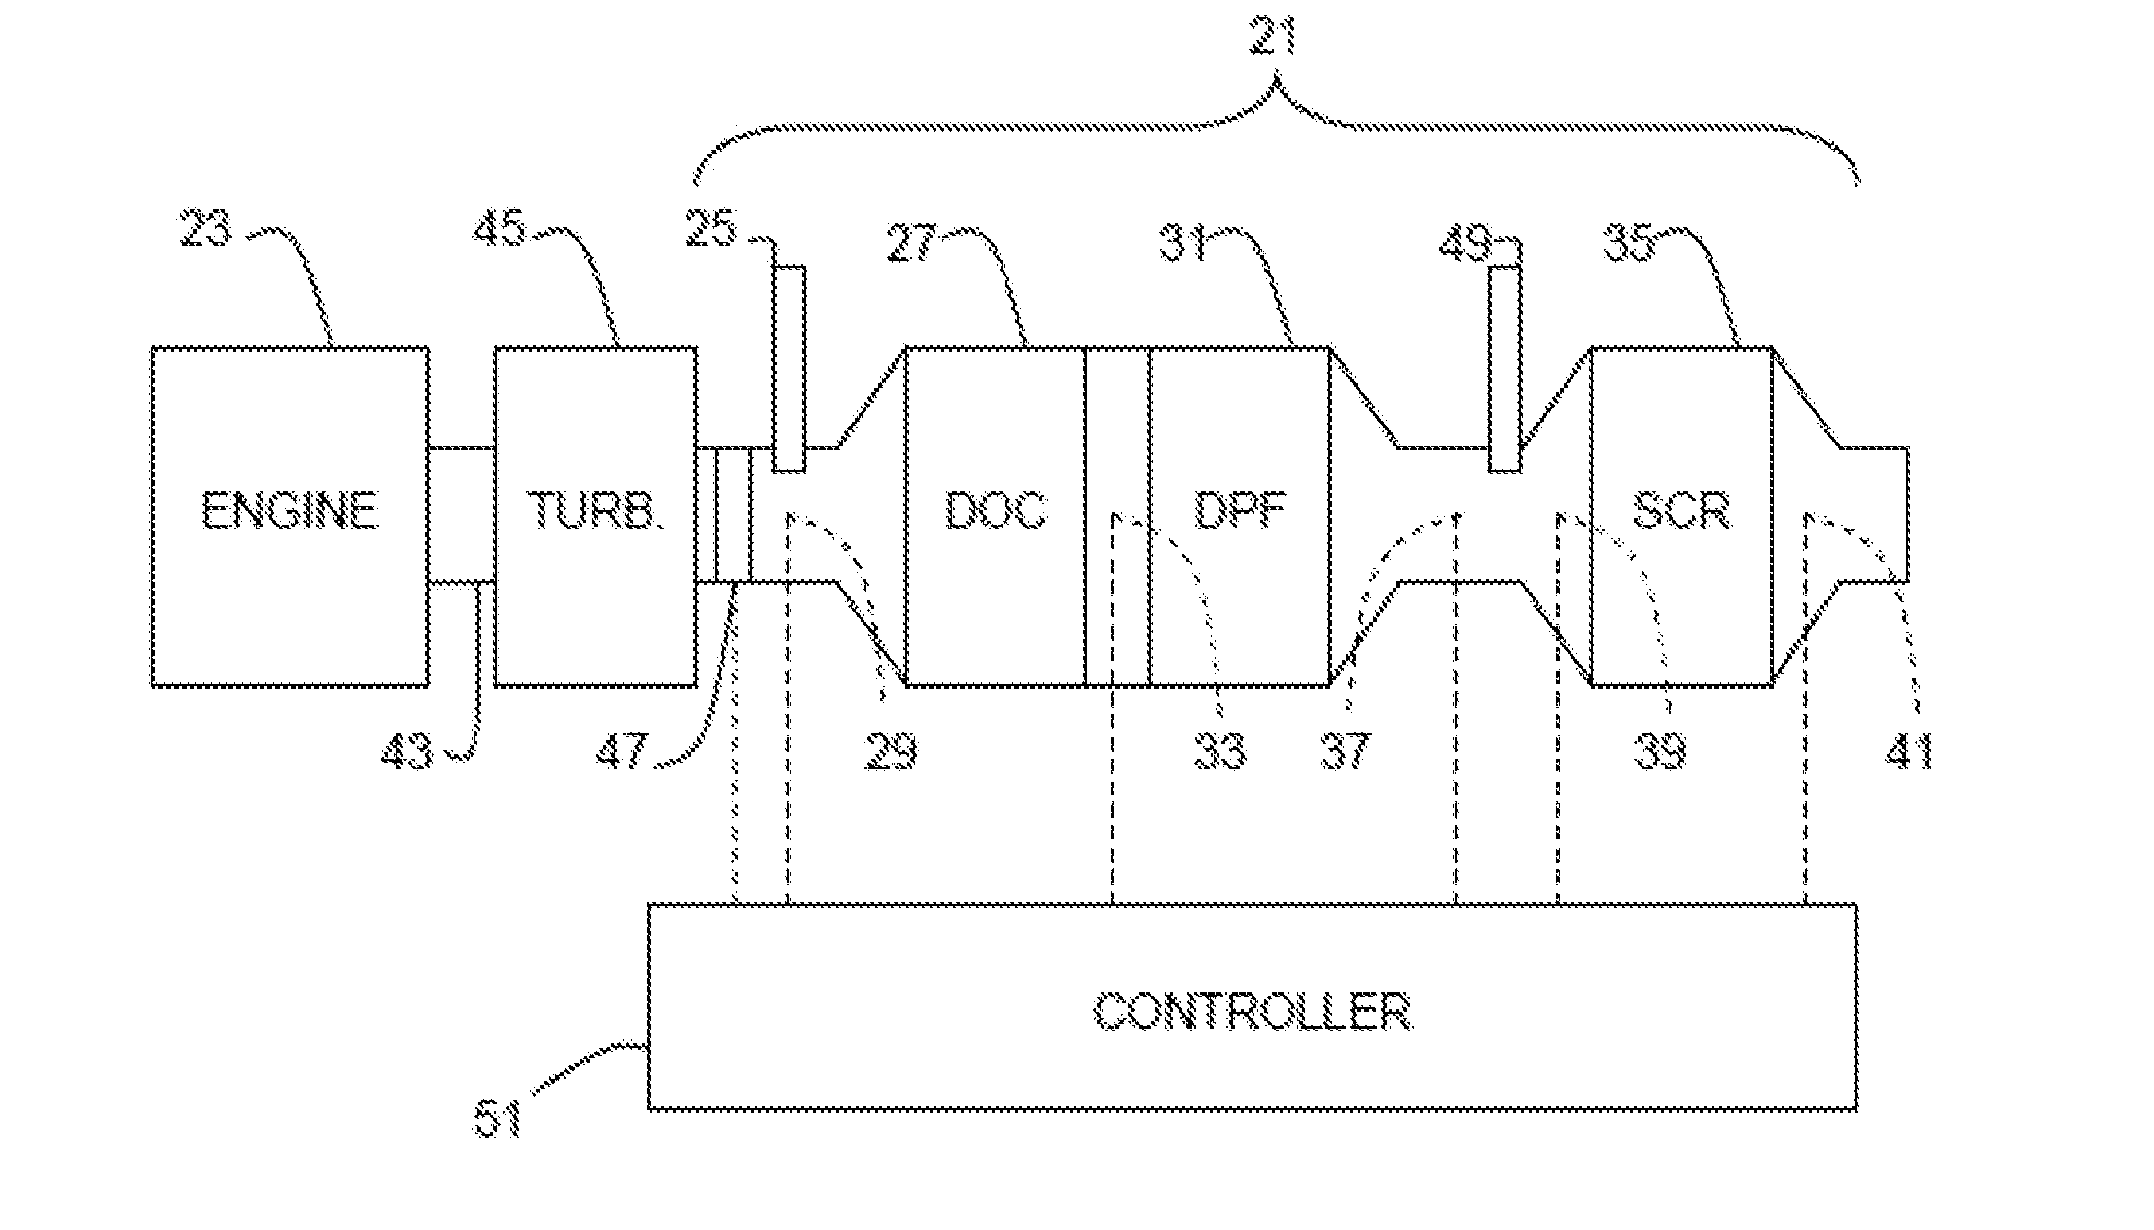 Method for monitoring components in an exhaust after treatment system, an exhaust after treatment system, and a controller for an exhaust after treatment system